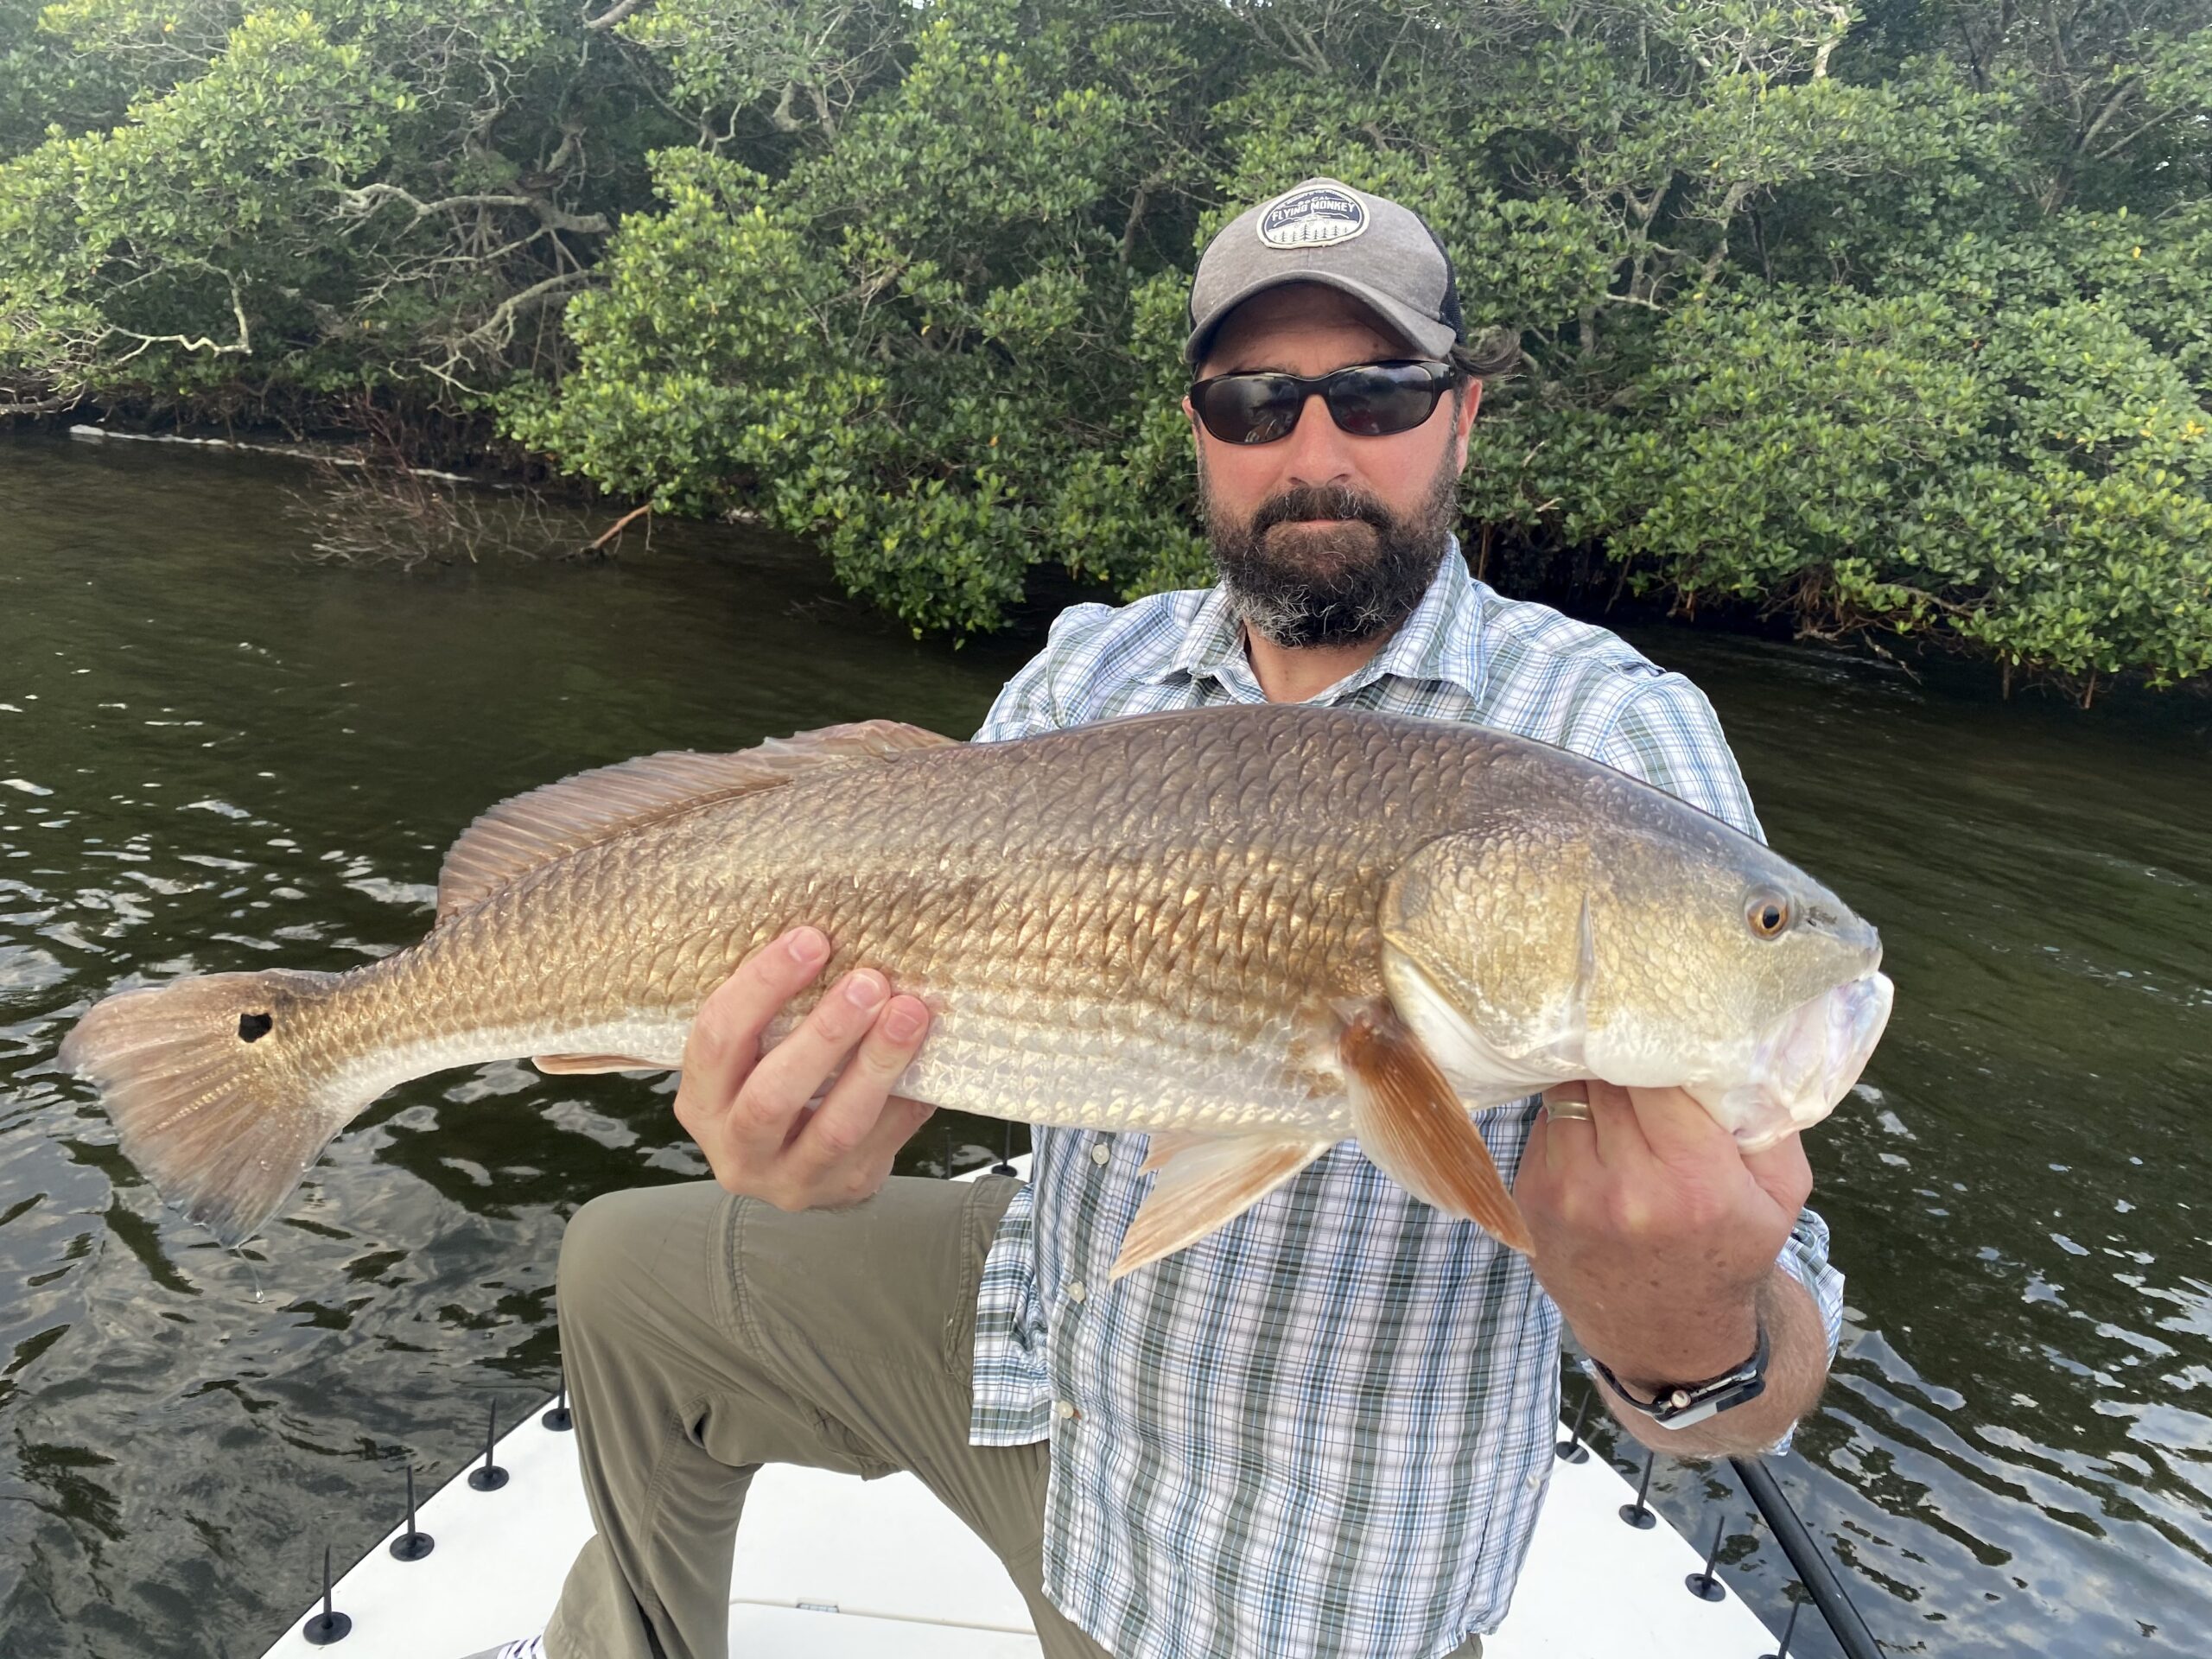 An angler holds up a chunky redfish for the camera that he caught while fishing